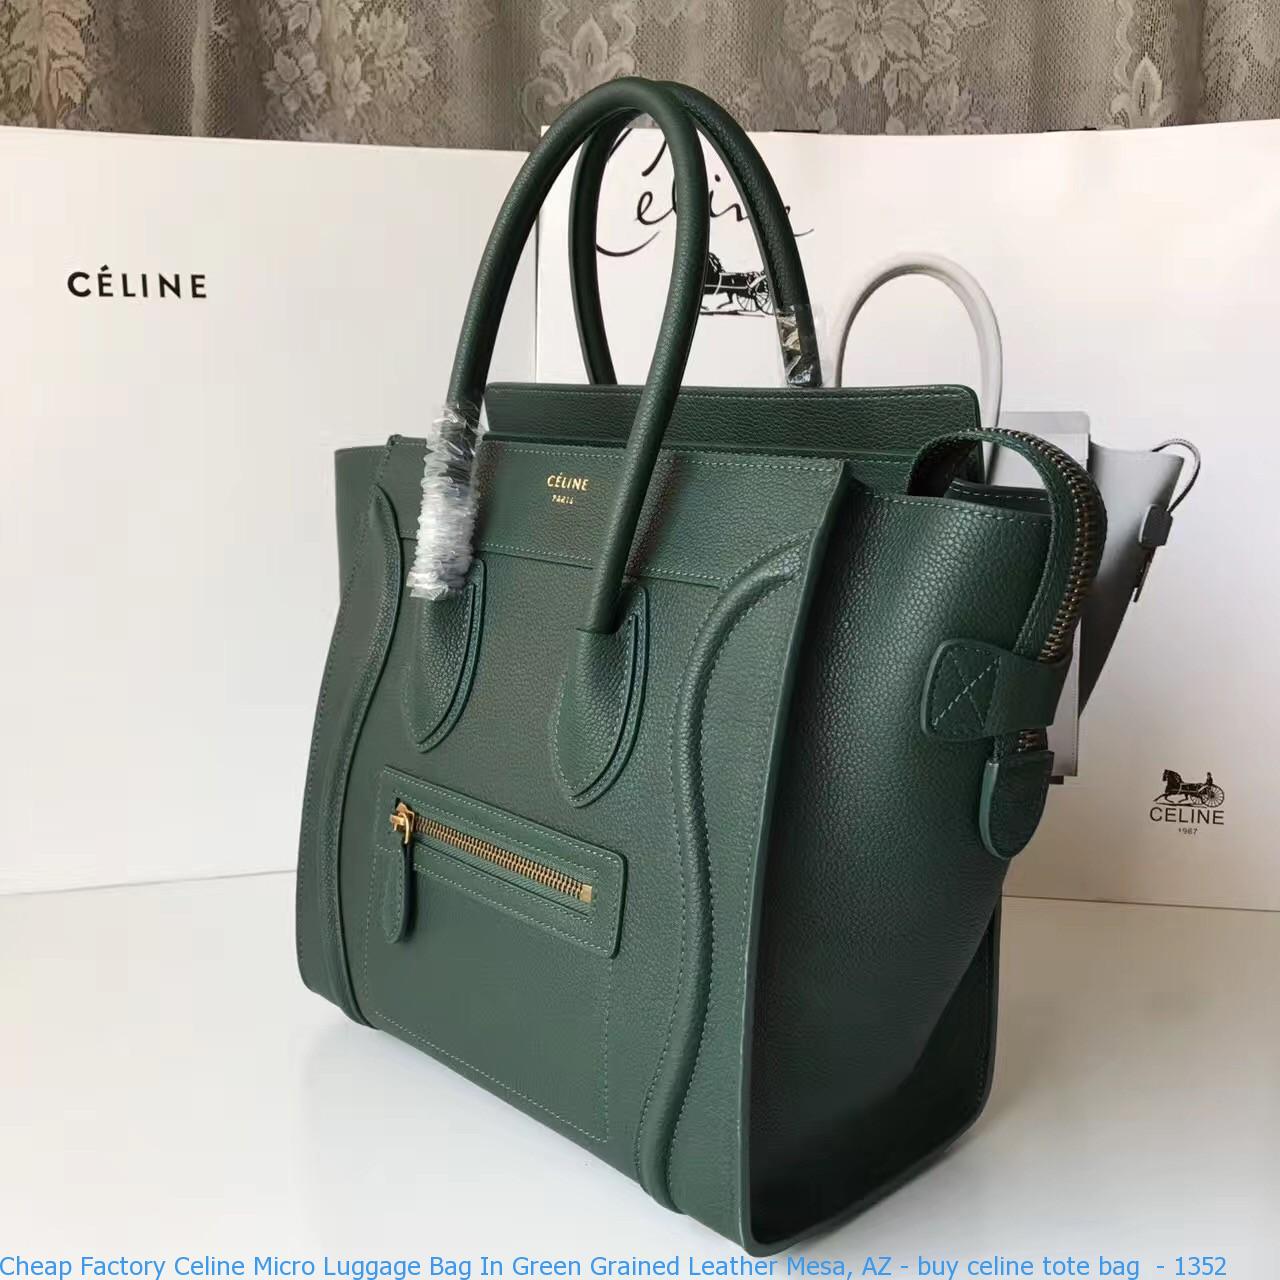 Cheap Factory Celine Micro Luggage Bag In Green Grained Leather Mesa ...